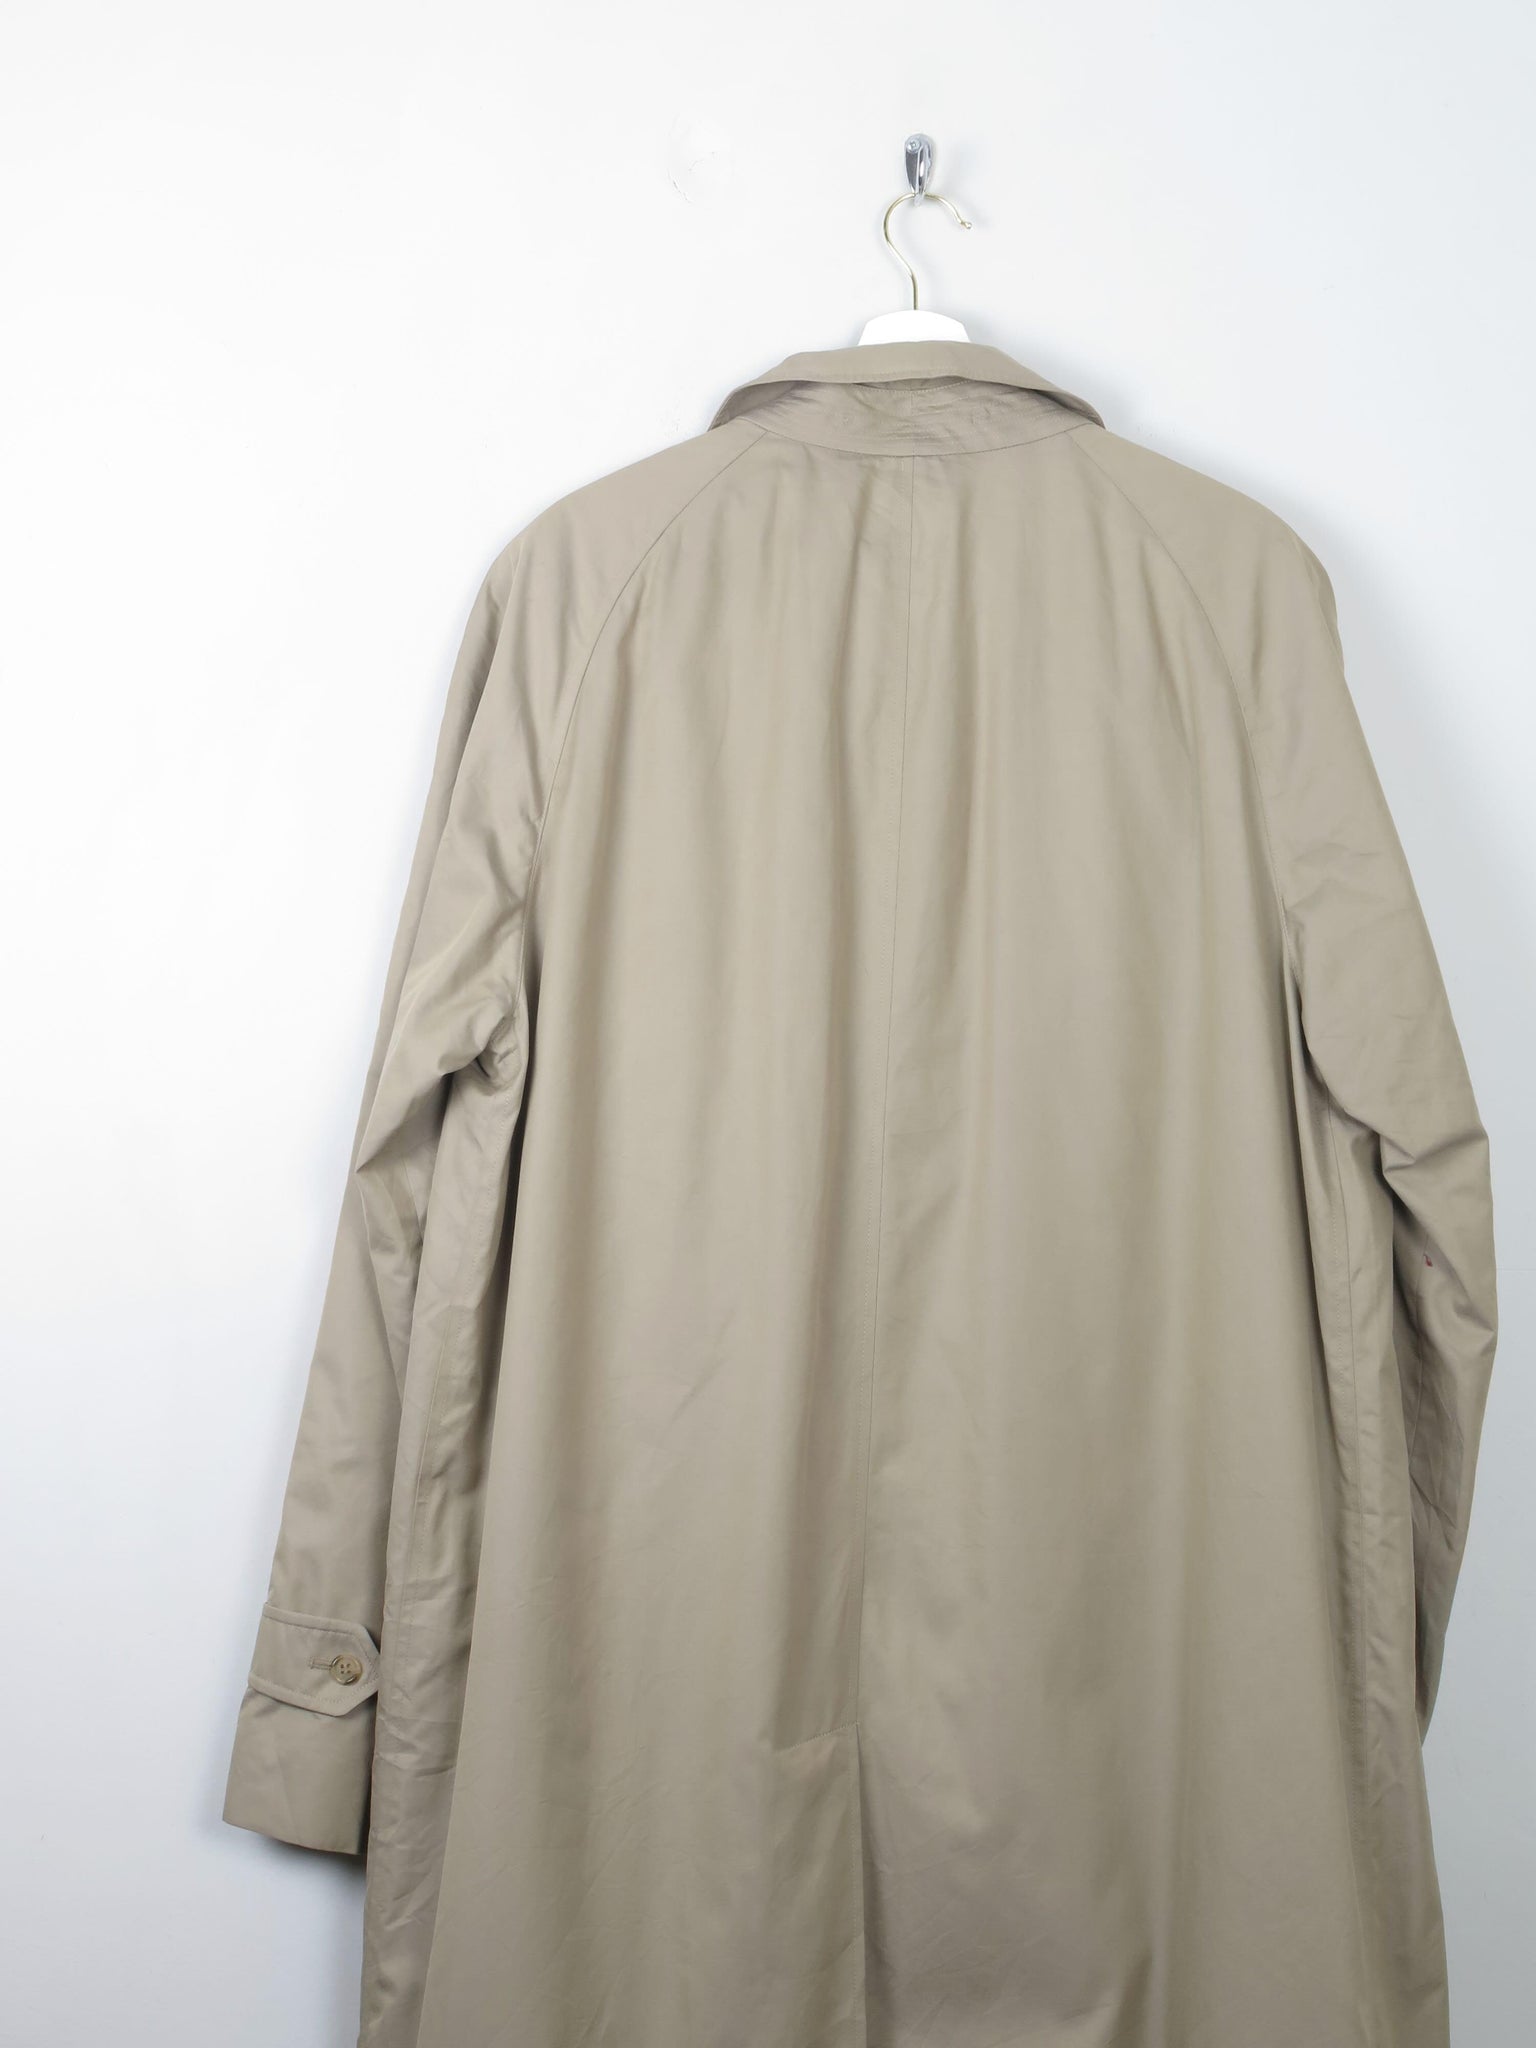 Men's Taupe/Beige Burberry Trench Coat L/XL - The Harlequin